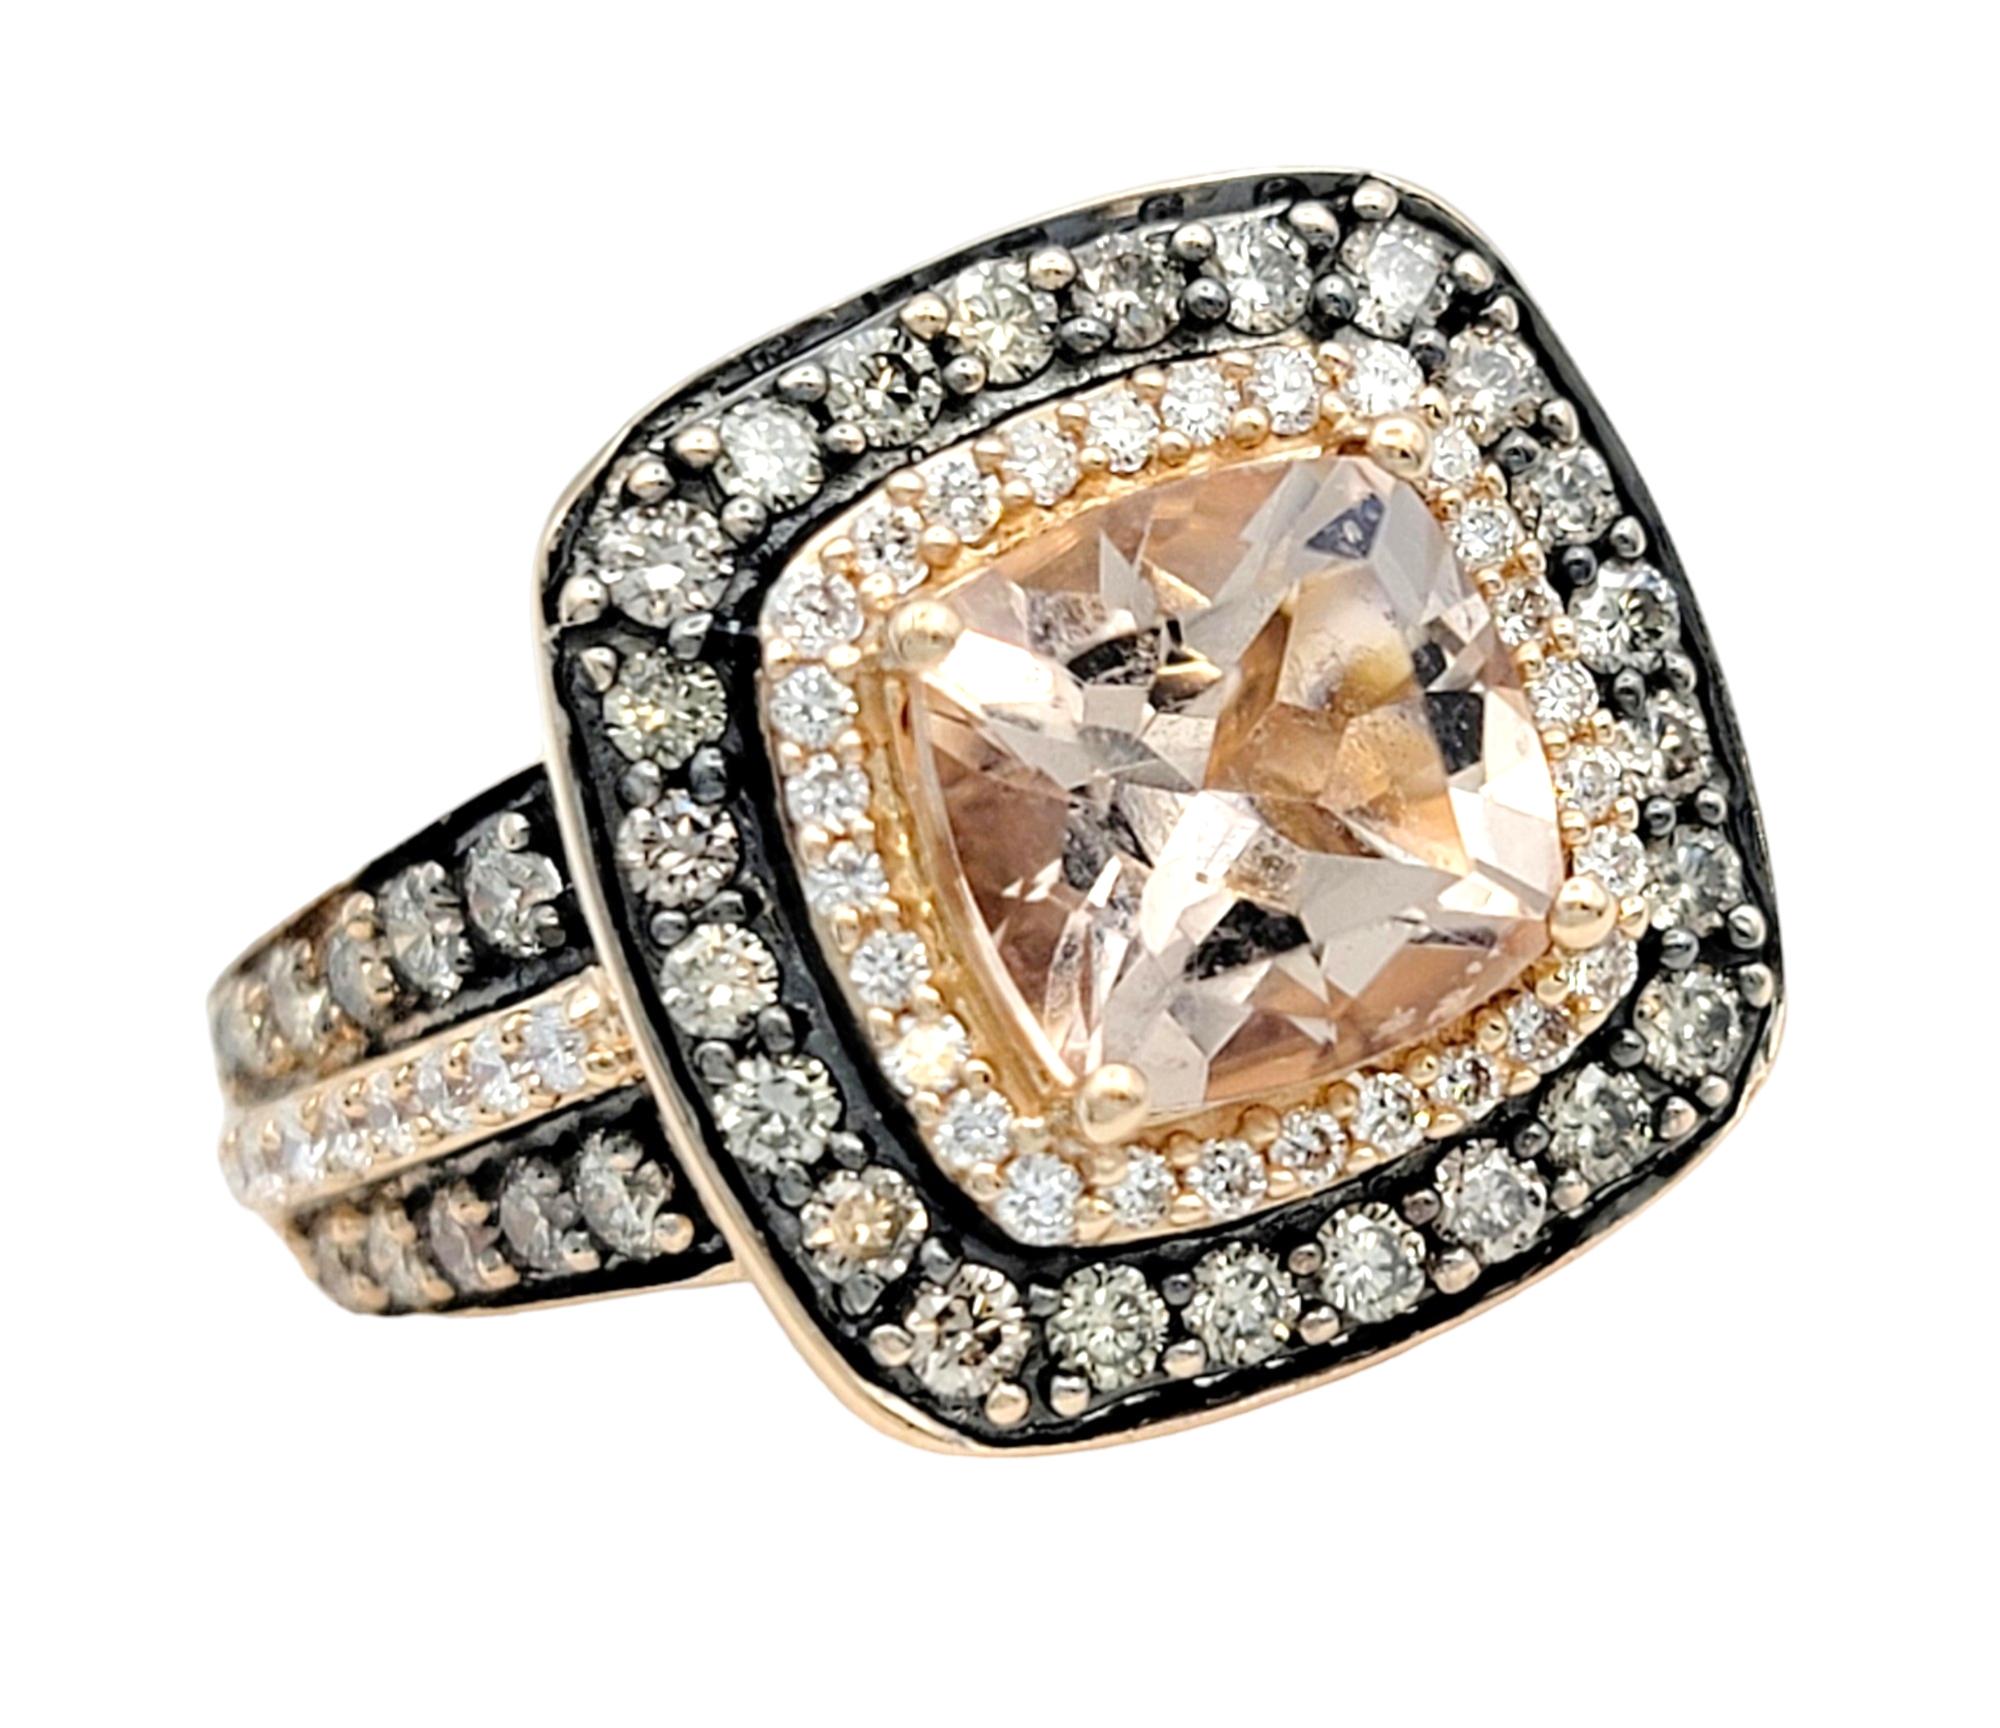 Ring size: 4 

This gorgeous Le Vian cocktail ring, set in lustrous 14 karat rose gold, is a mesmerizing symphony of color and brilliance. At its heart is a breathtaking 1.00 carat cushion-cut morganite. The morganite's dreamy hue is absolutely